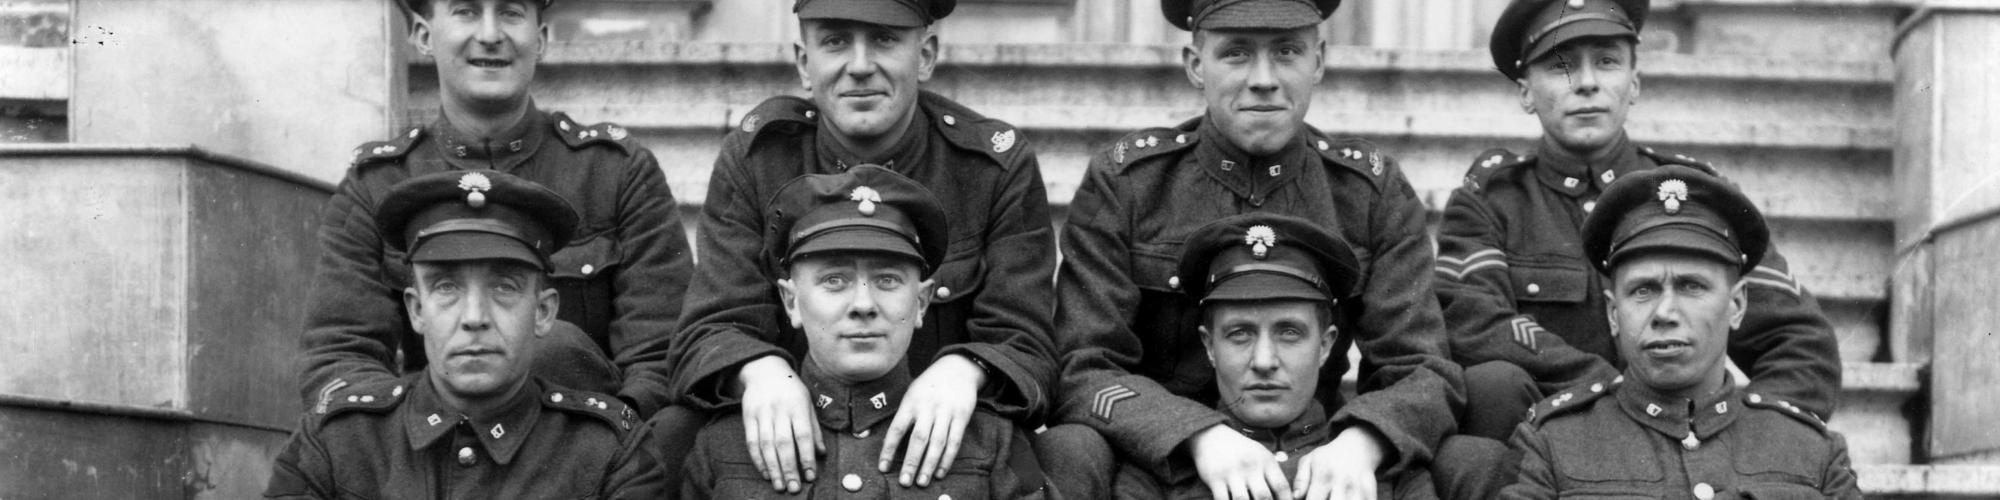 Canadian soldiers First World War 